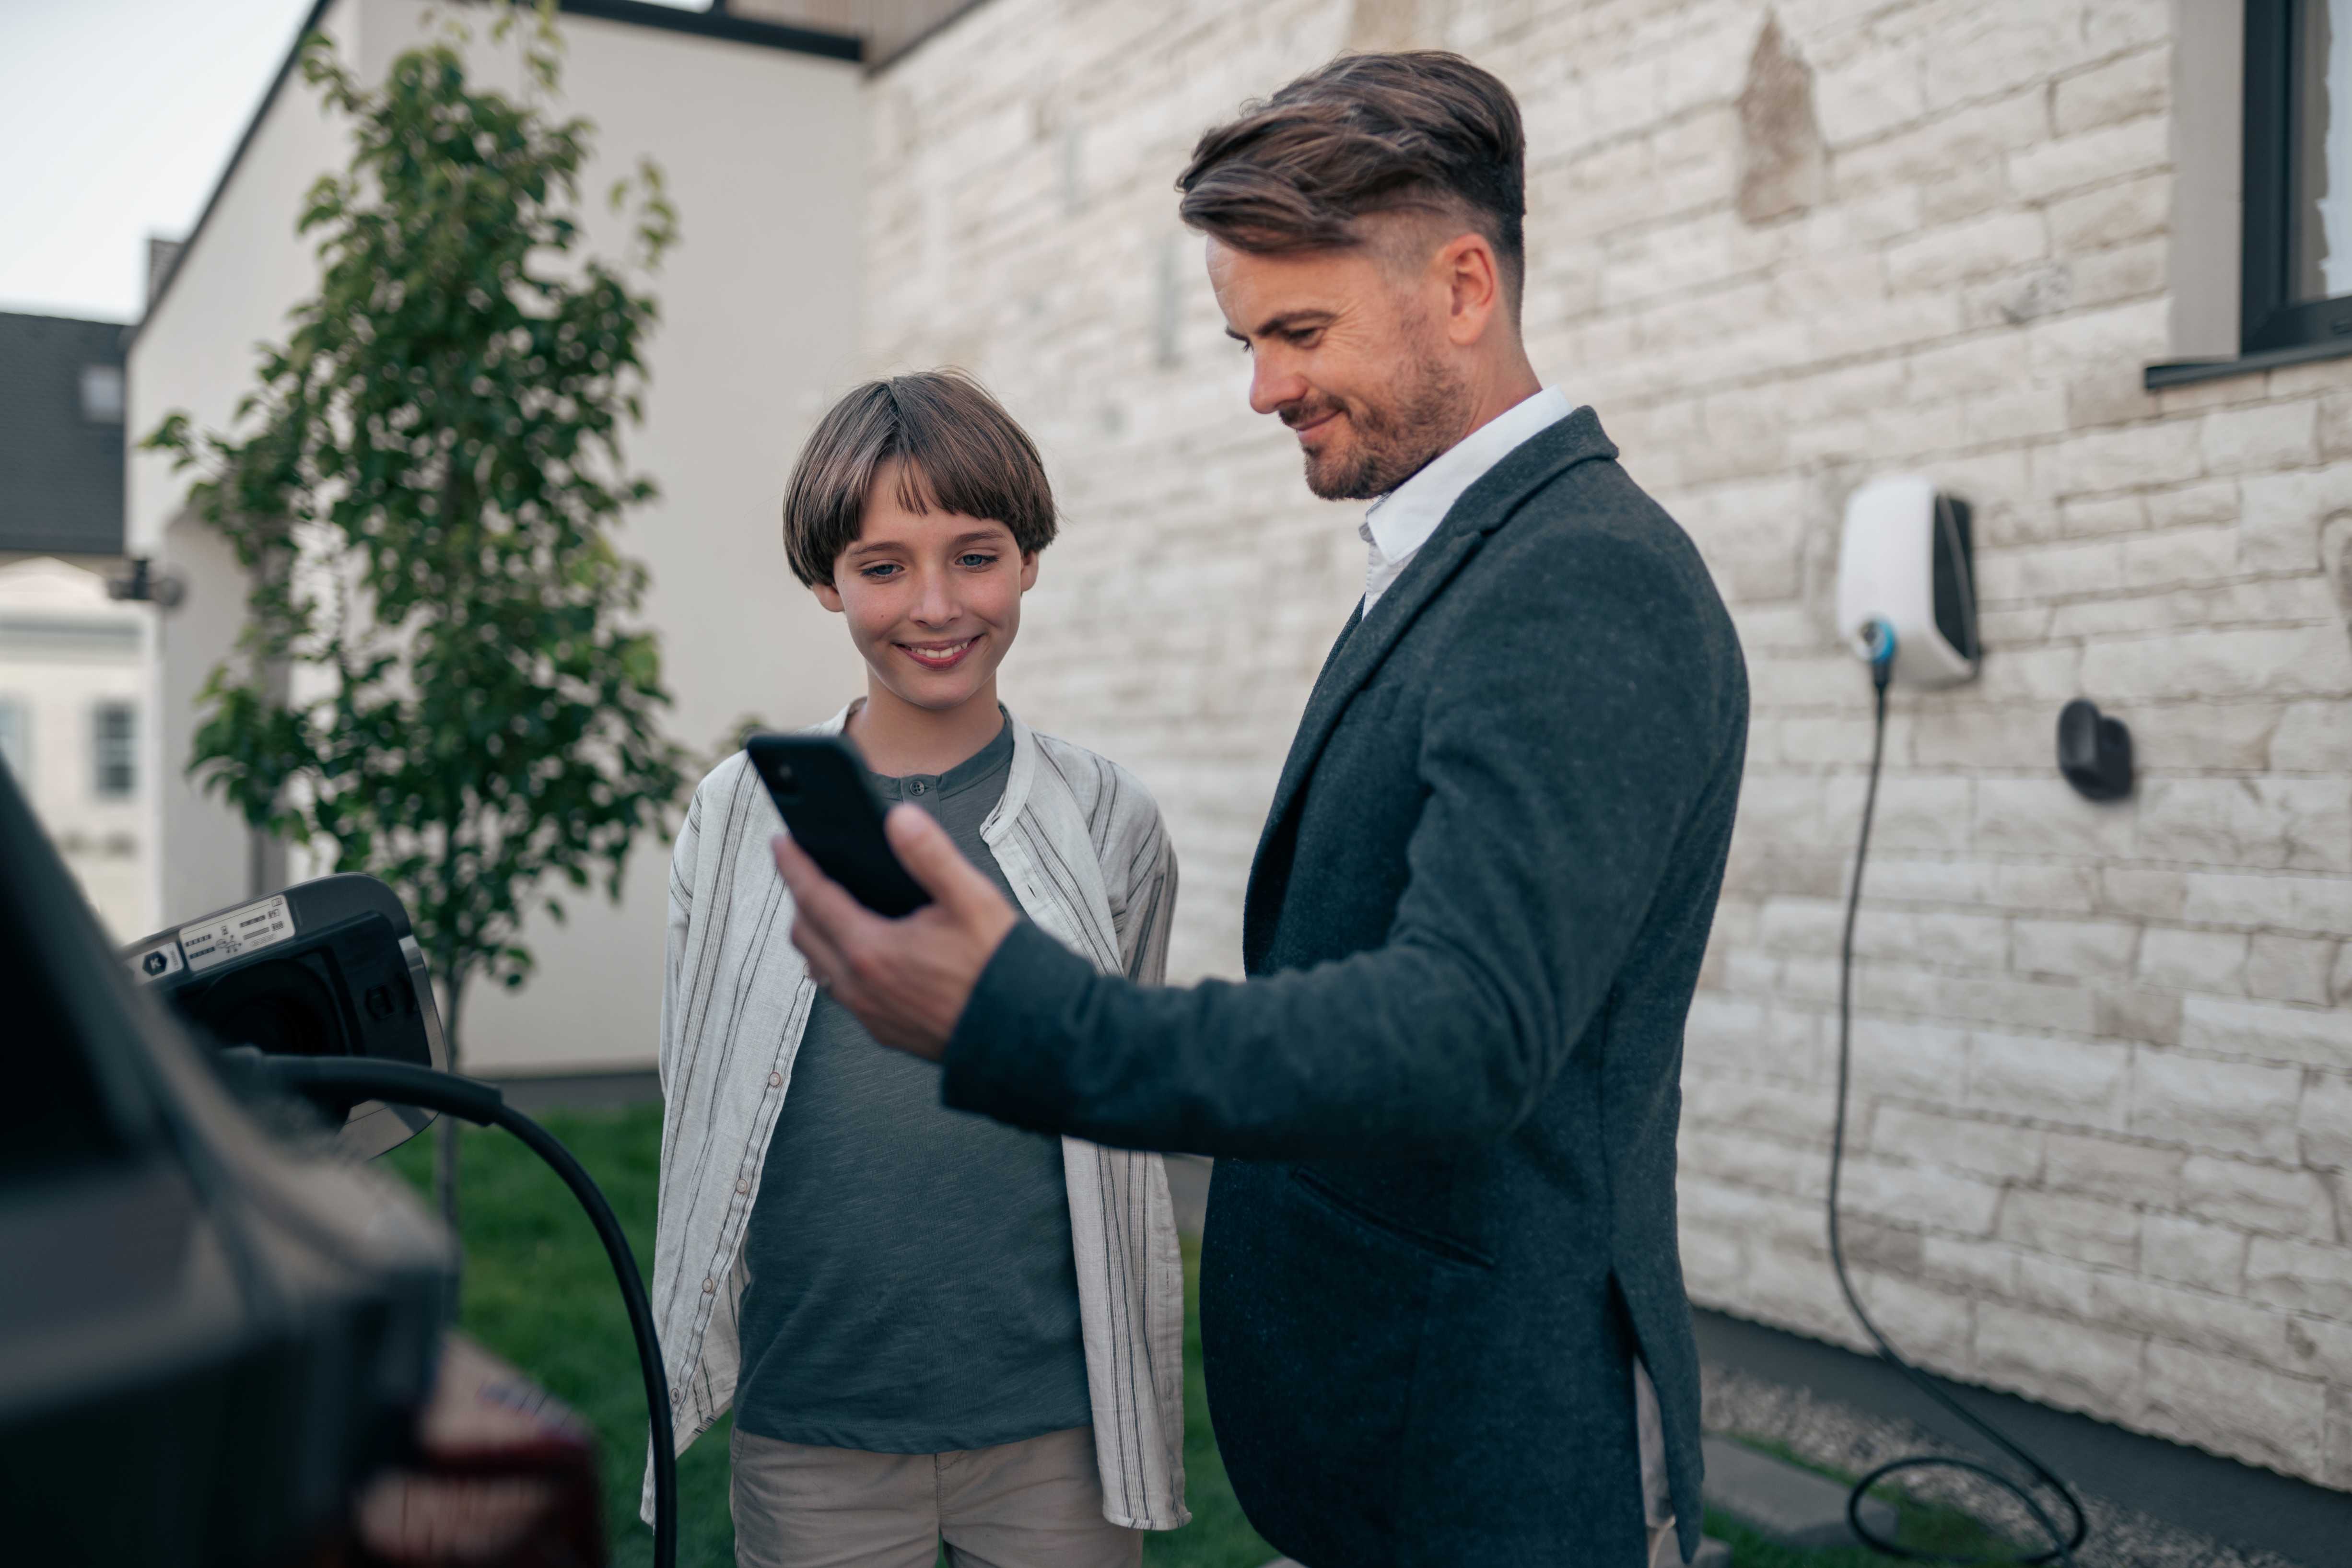 A father showing his son his smart phone that opens to the smart charging app while their electric car is charging and connected to the home charging station mounted on the wall.